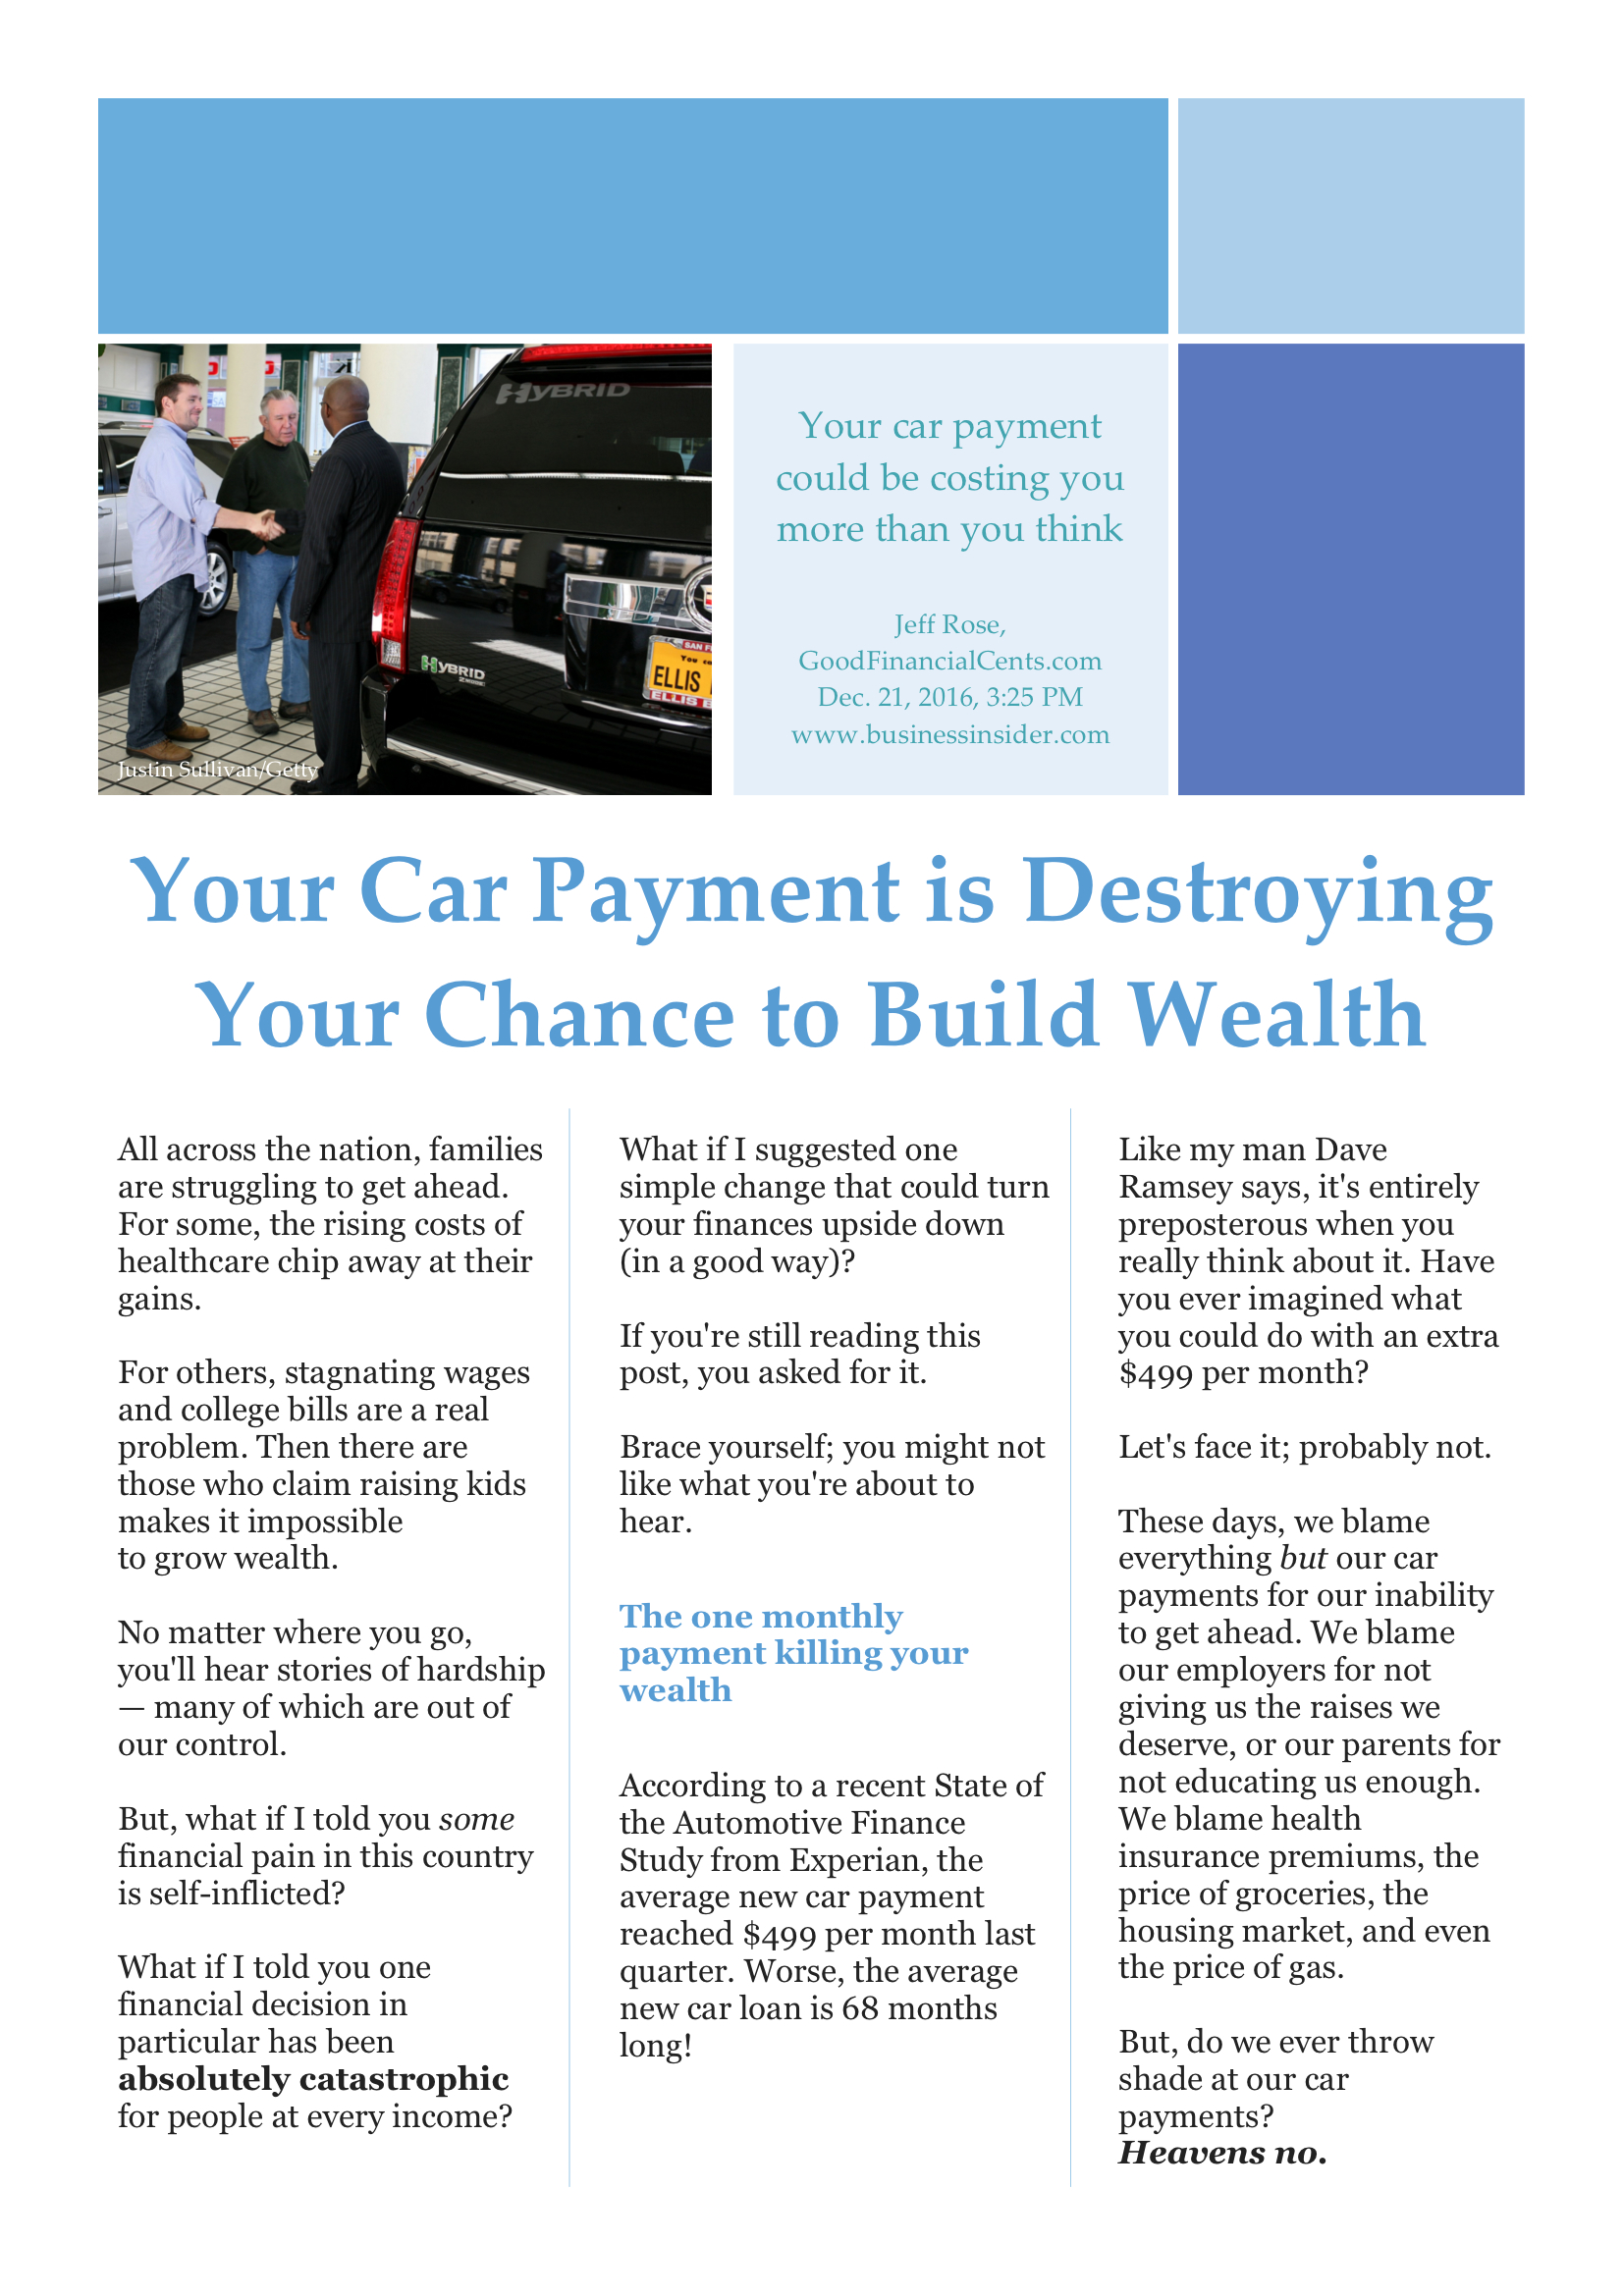 Your Car Payment is Destroying Your Chance to Build Wealth